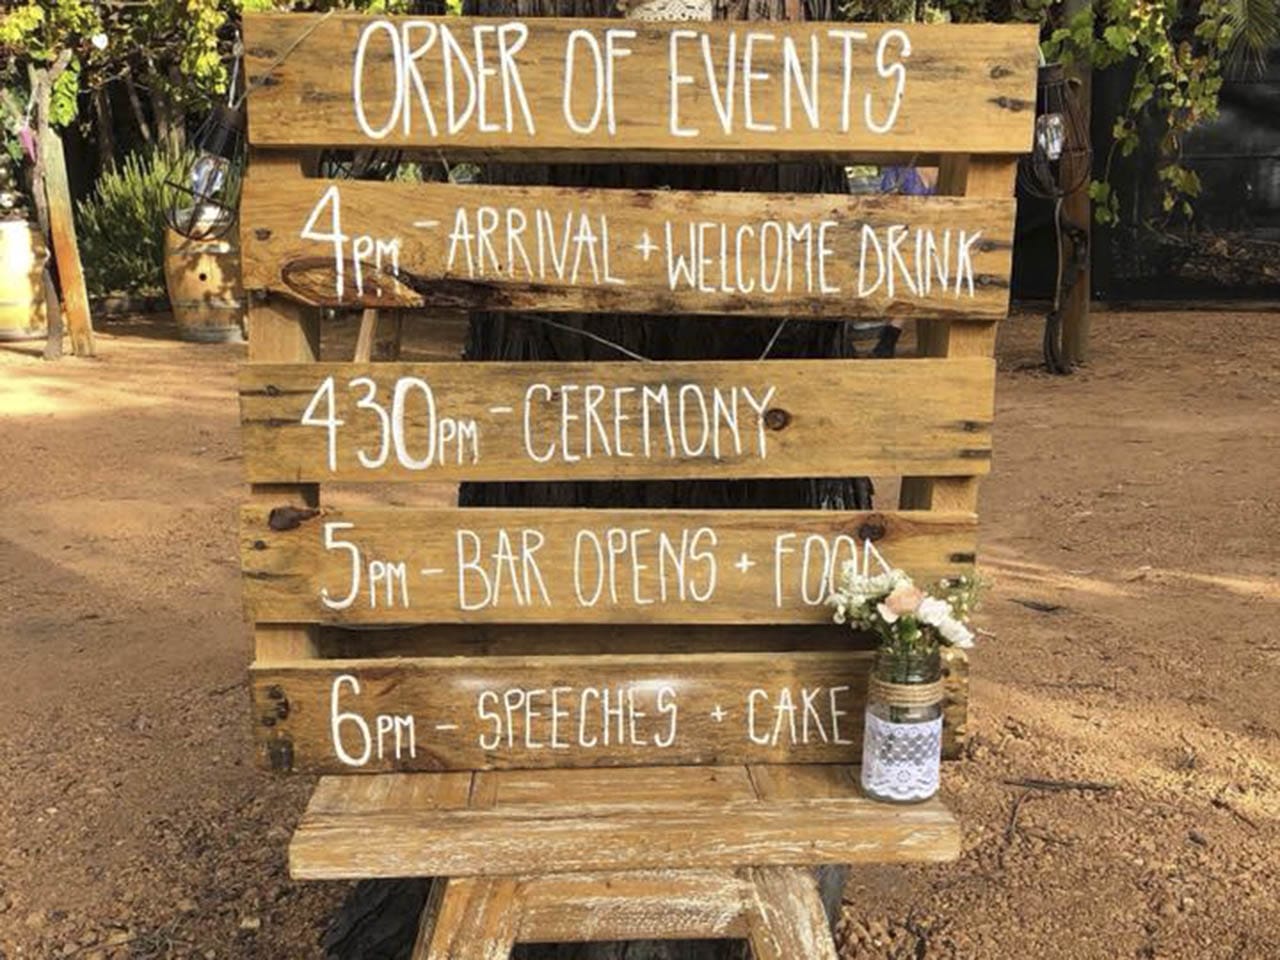 Time Table Of The Event Written In Wood